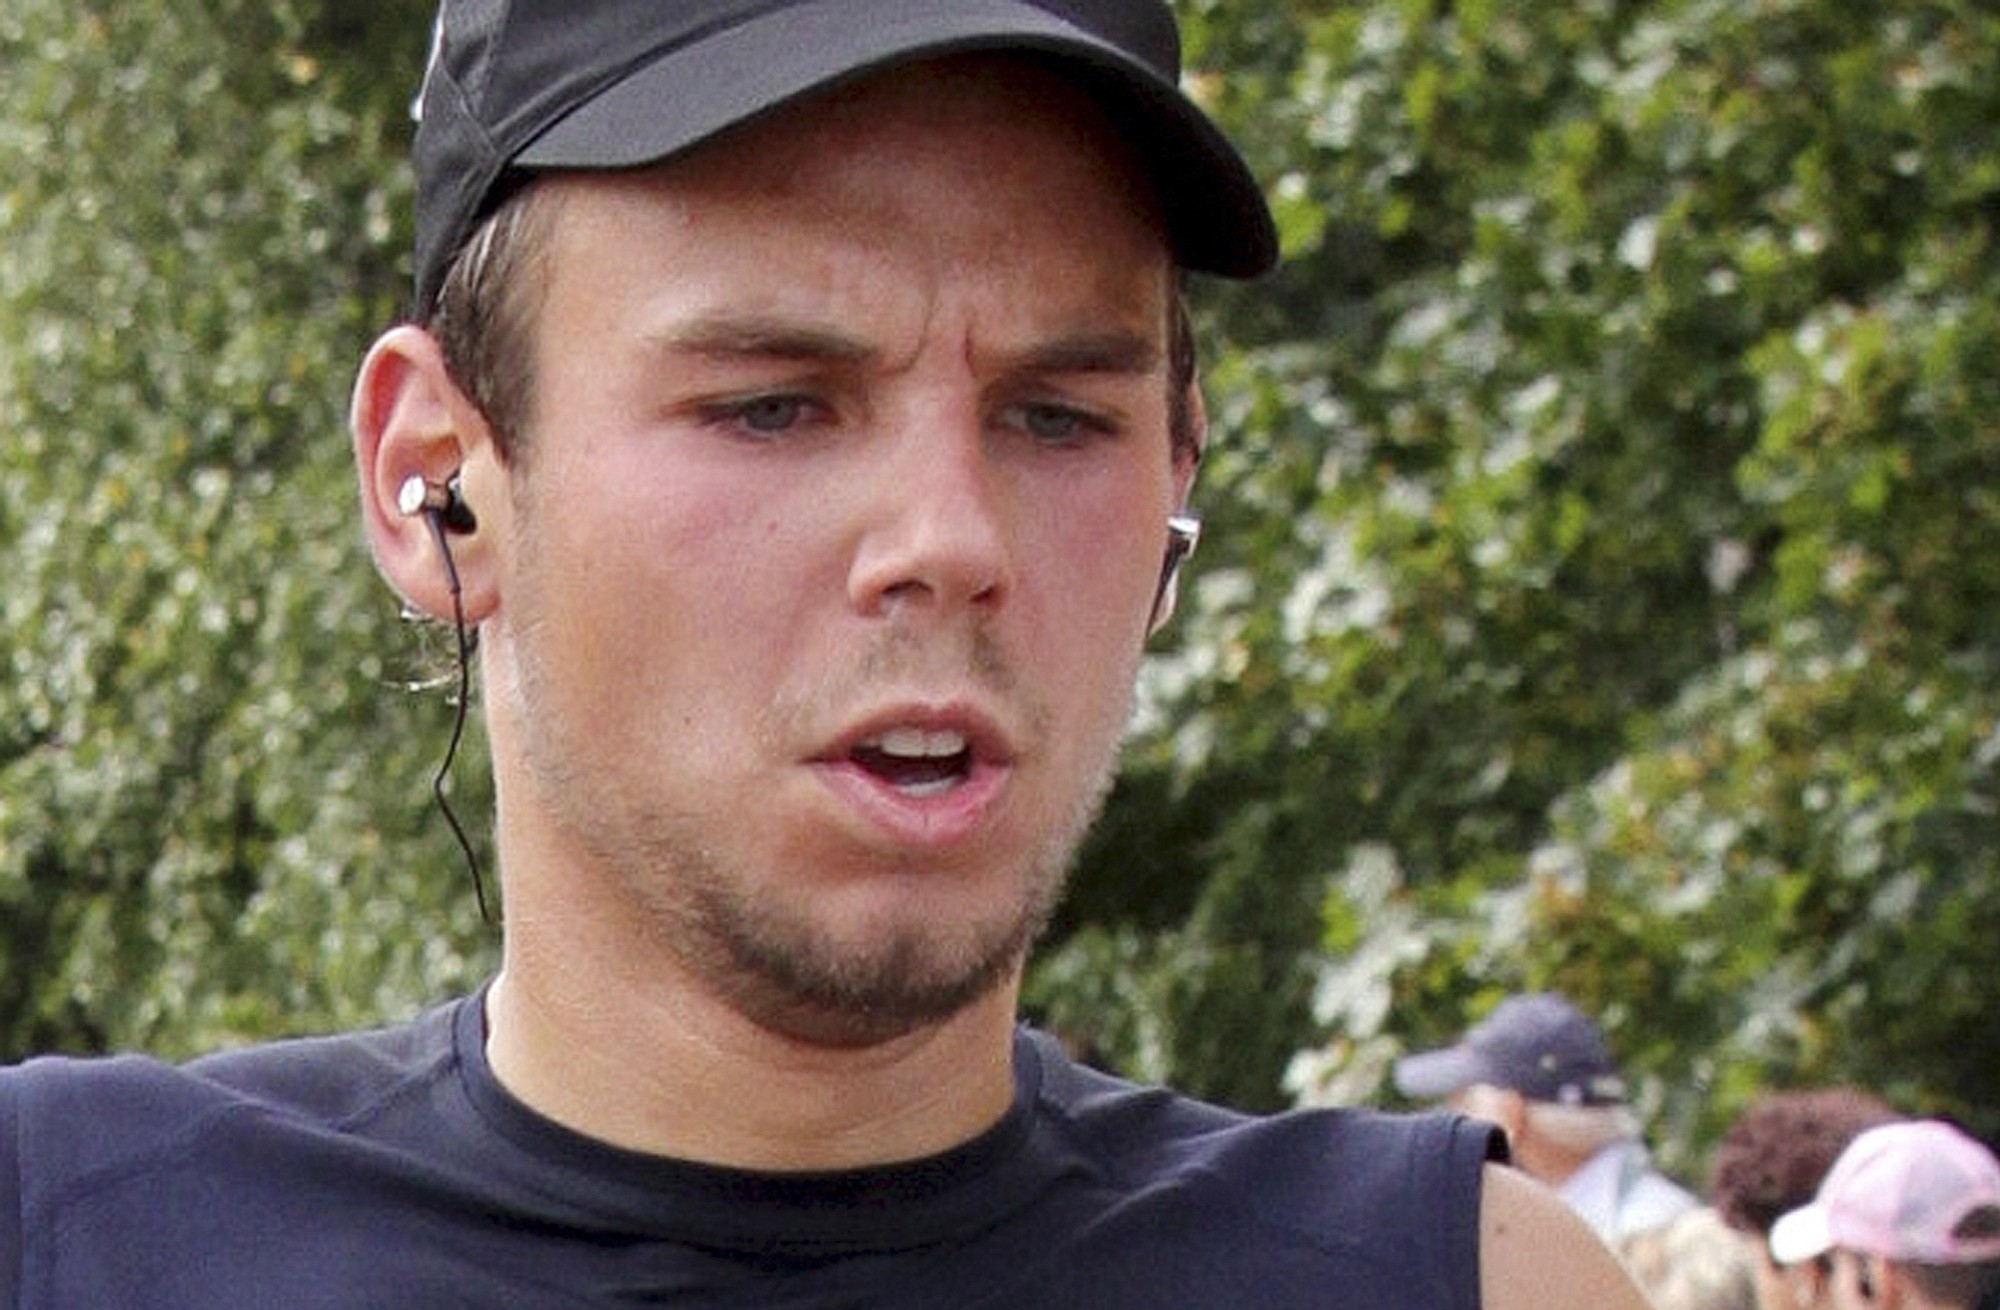 Andreas Lubitz competes at the Airportrun in Hamburg, northern Germany, on Sept. 13, 2009. The Germanwings co-pilot appears to have hidden evidence of an illness from his employers, including having been excused by a doctor from work the day he crashed a passenger plane into a mountain, prosecutors said Friday.